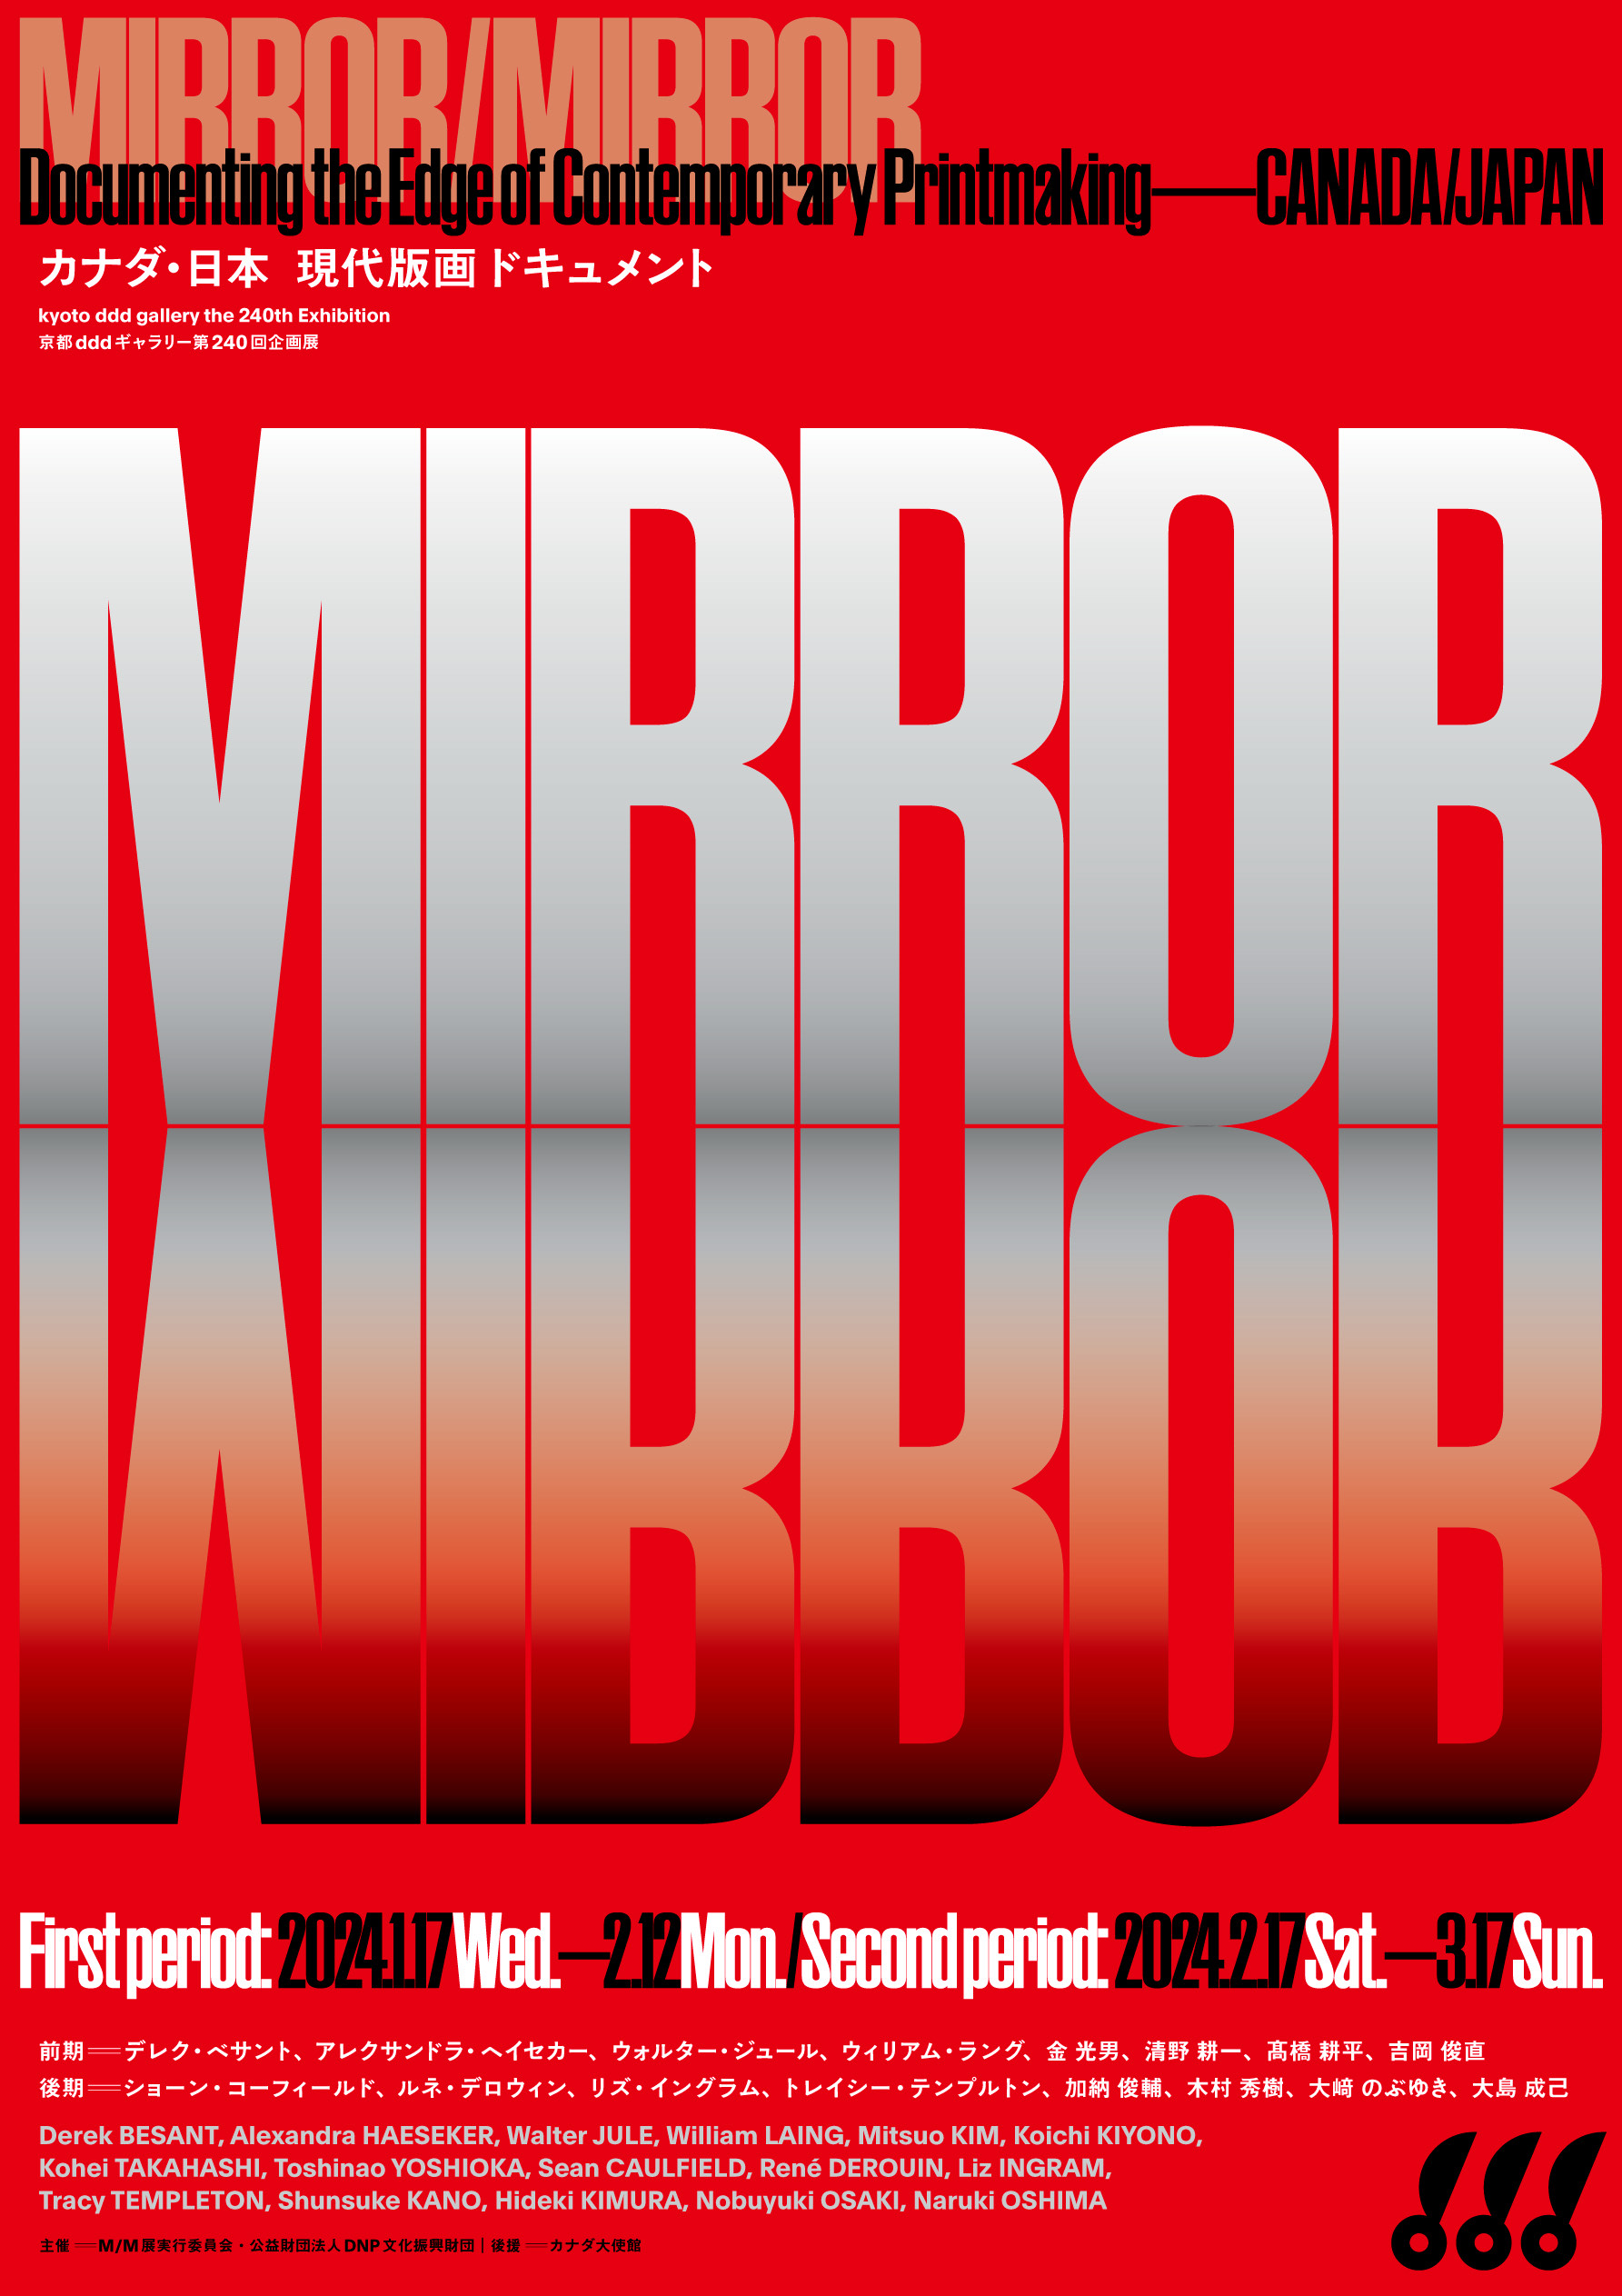 MIRROR/MIRROR: Documenting the Edge of Contemporary Printmaking—CANADA/JAPAN